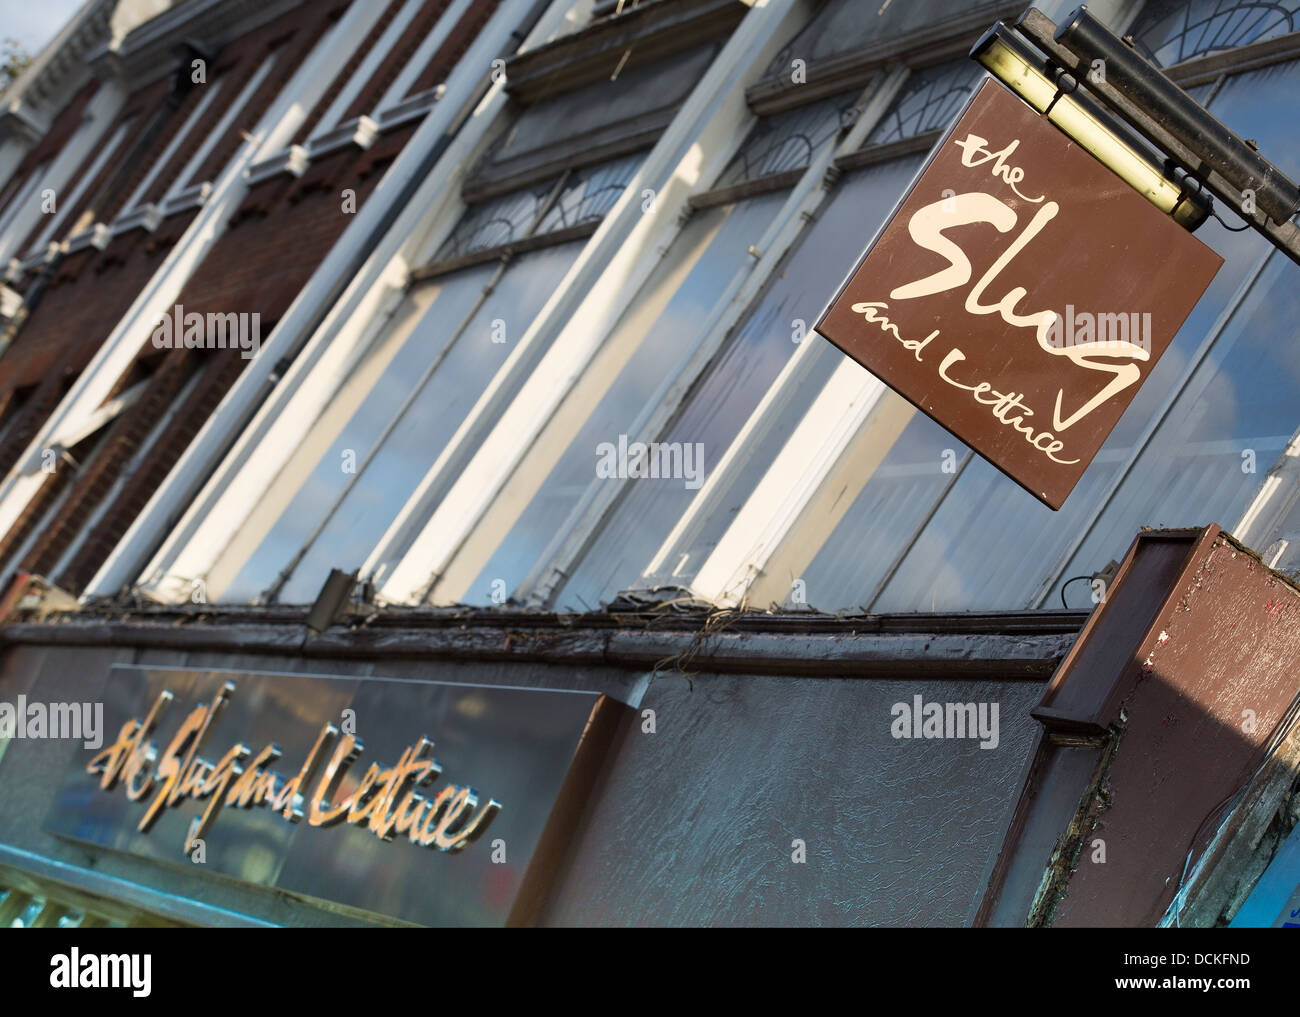 19/08/2013 The Slug and Lettuce, bar sign in Southend-on-sea Stock Photo